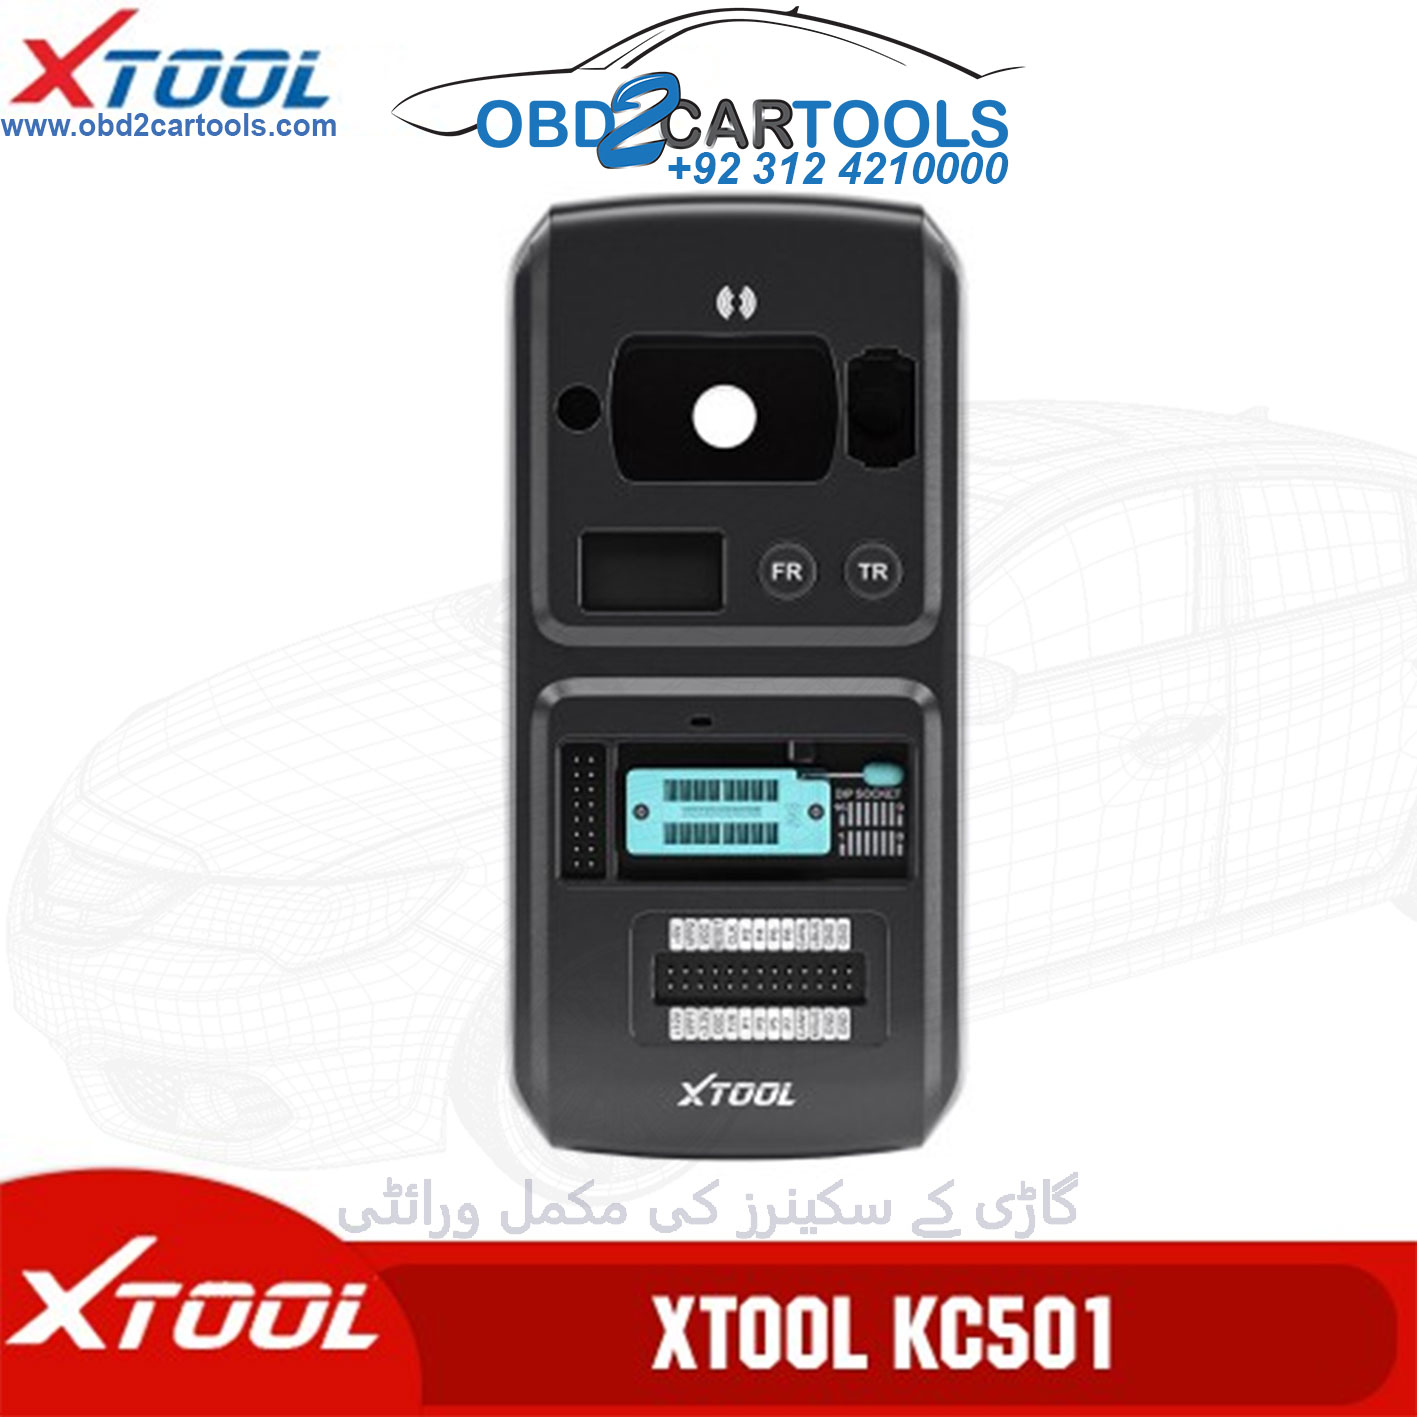 Product image for XTOOL KC501 Mercedes Infrared Key Programming Tool Support MCU/EEPROM Chips Reading&Writing Work with X100 PADELITE